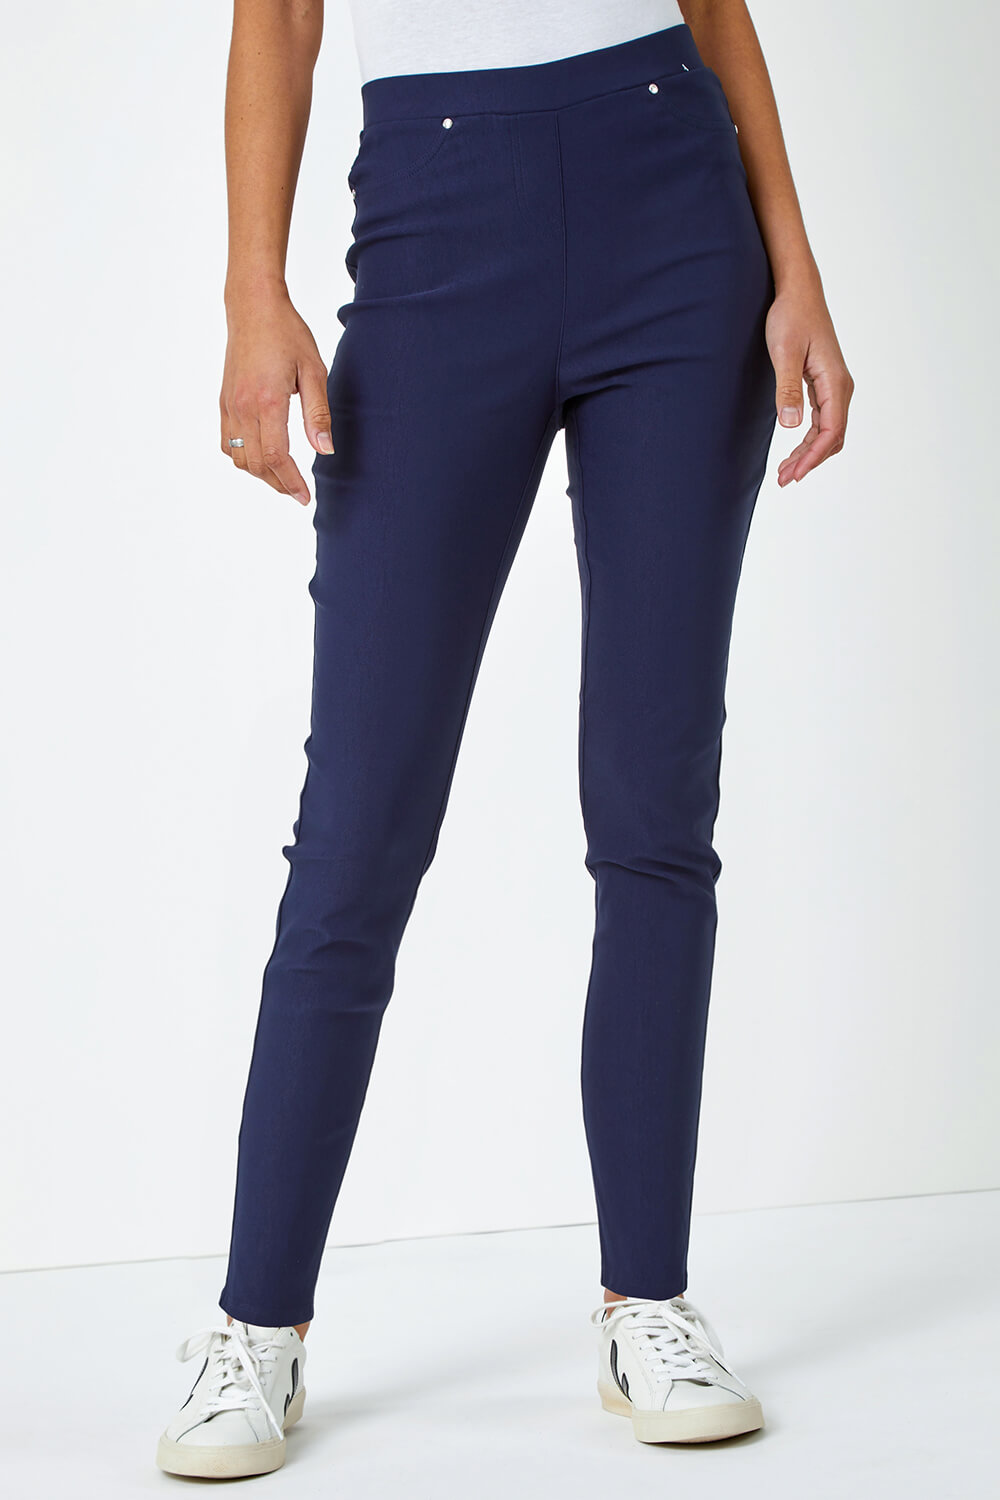 Navy  Stretch Jean Trouser, Image 4 of 4